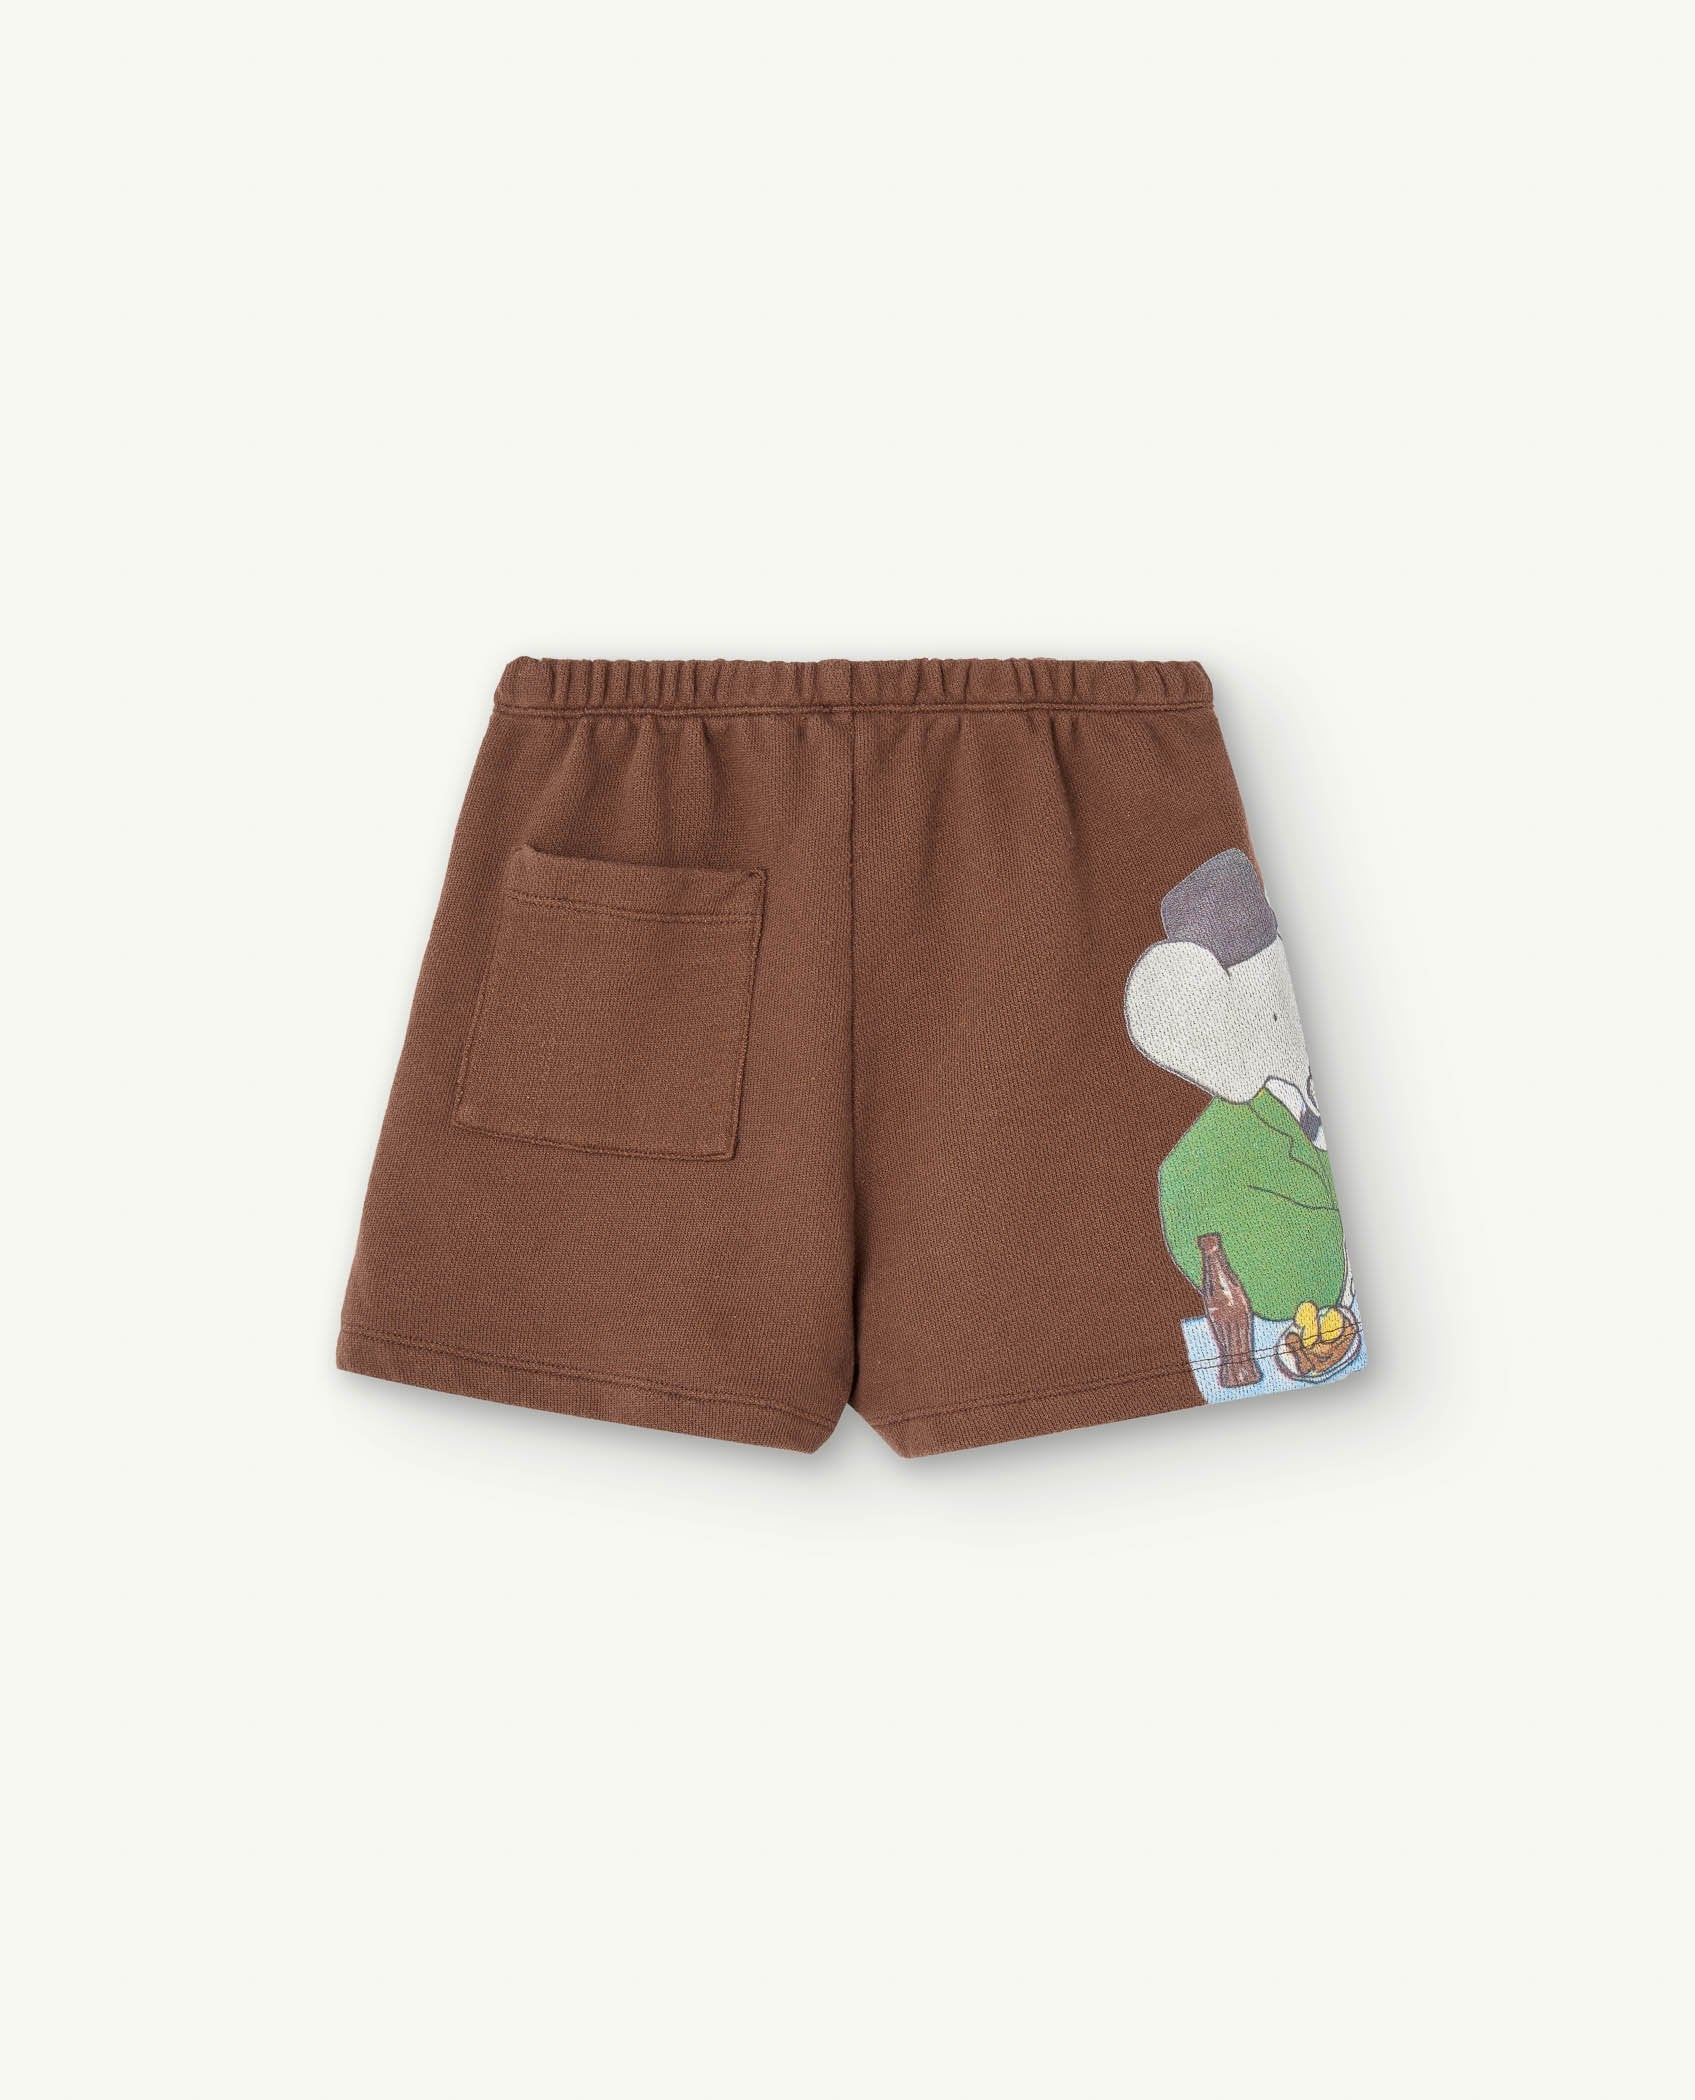 Babar Brown Clam Shorts PRODUCT BACK